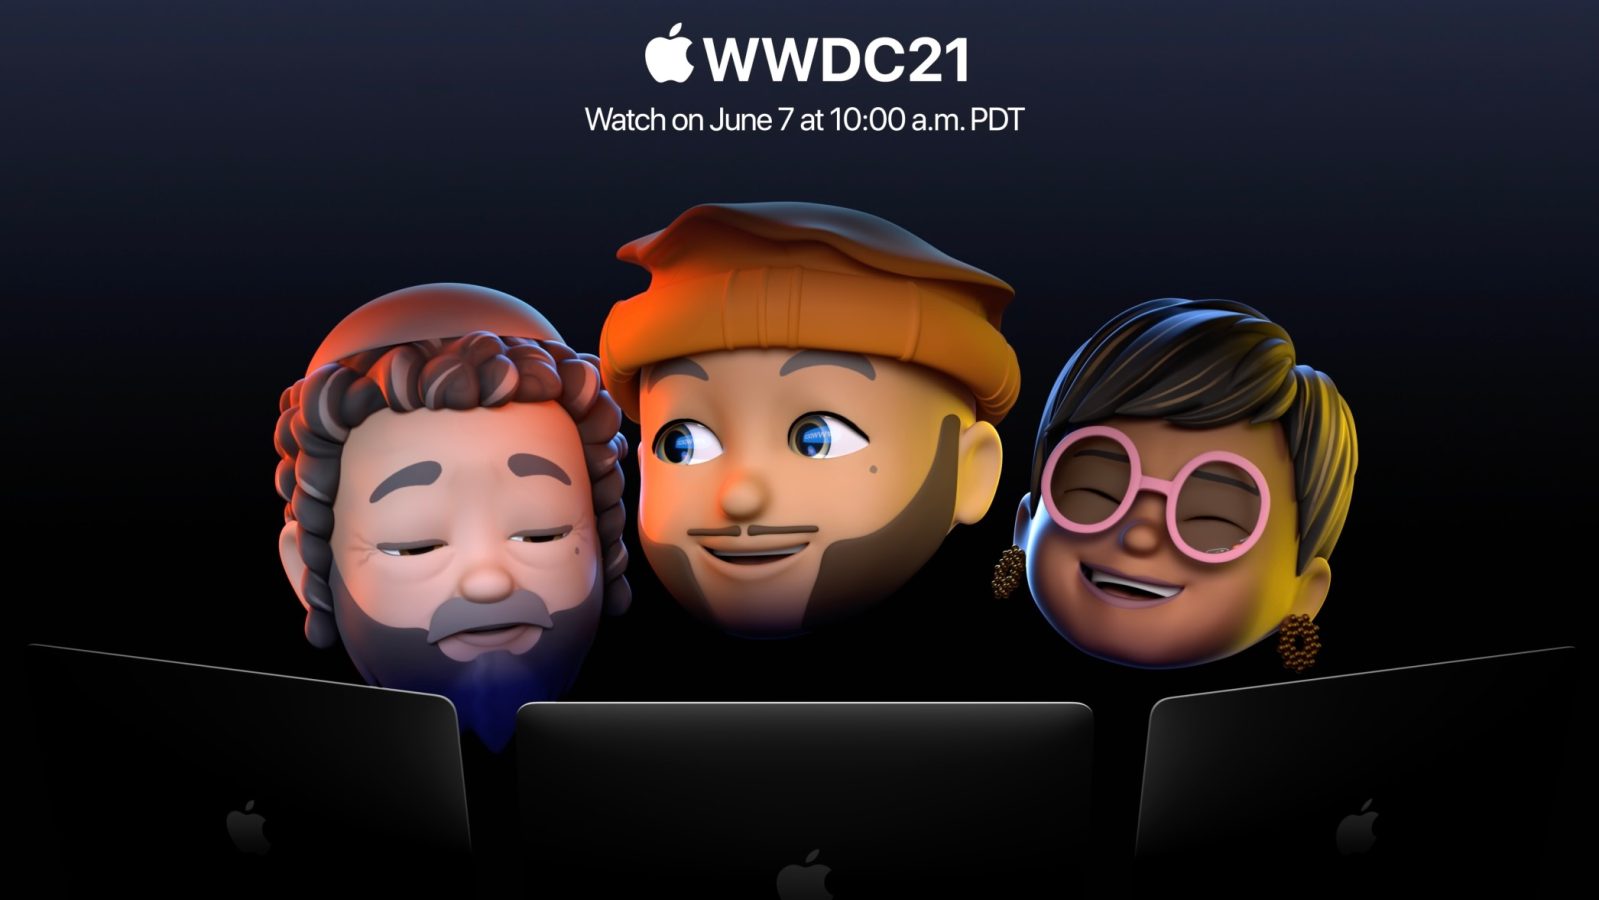 WWDC 2021 News Hub iOS 15, watchOS 8, and more 9to5Mac